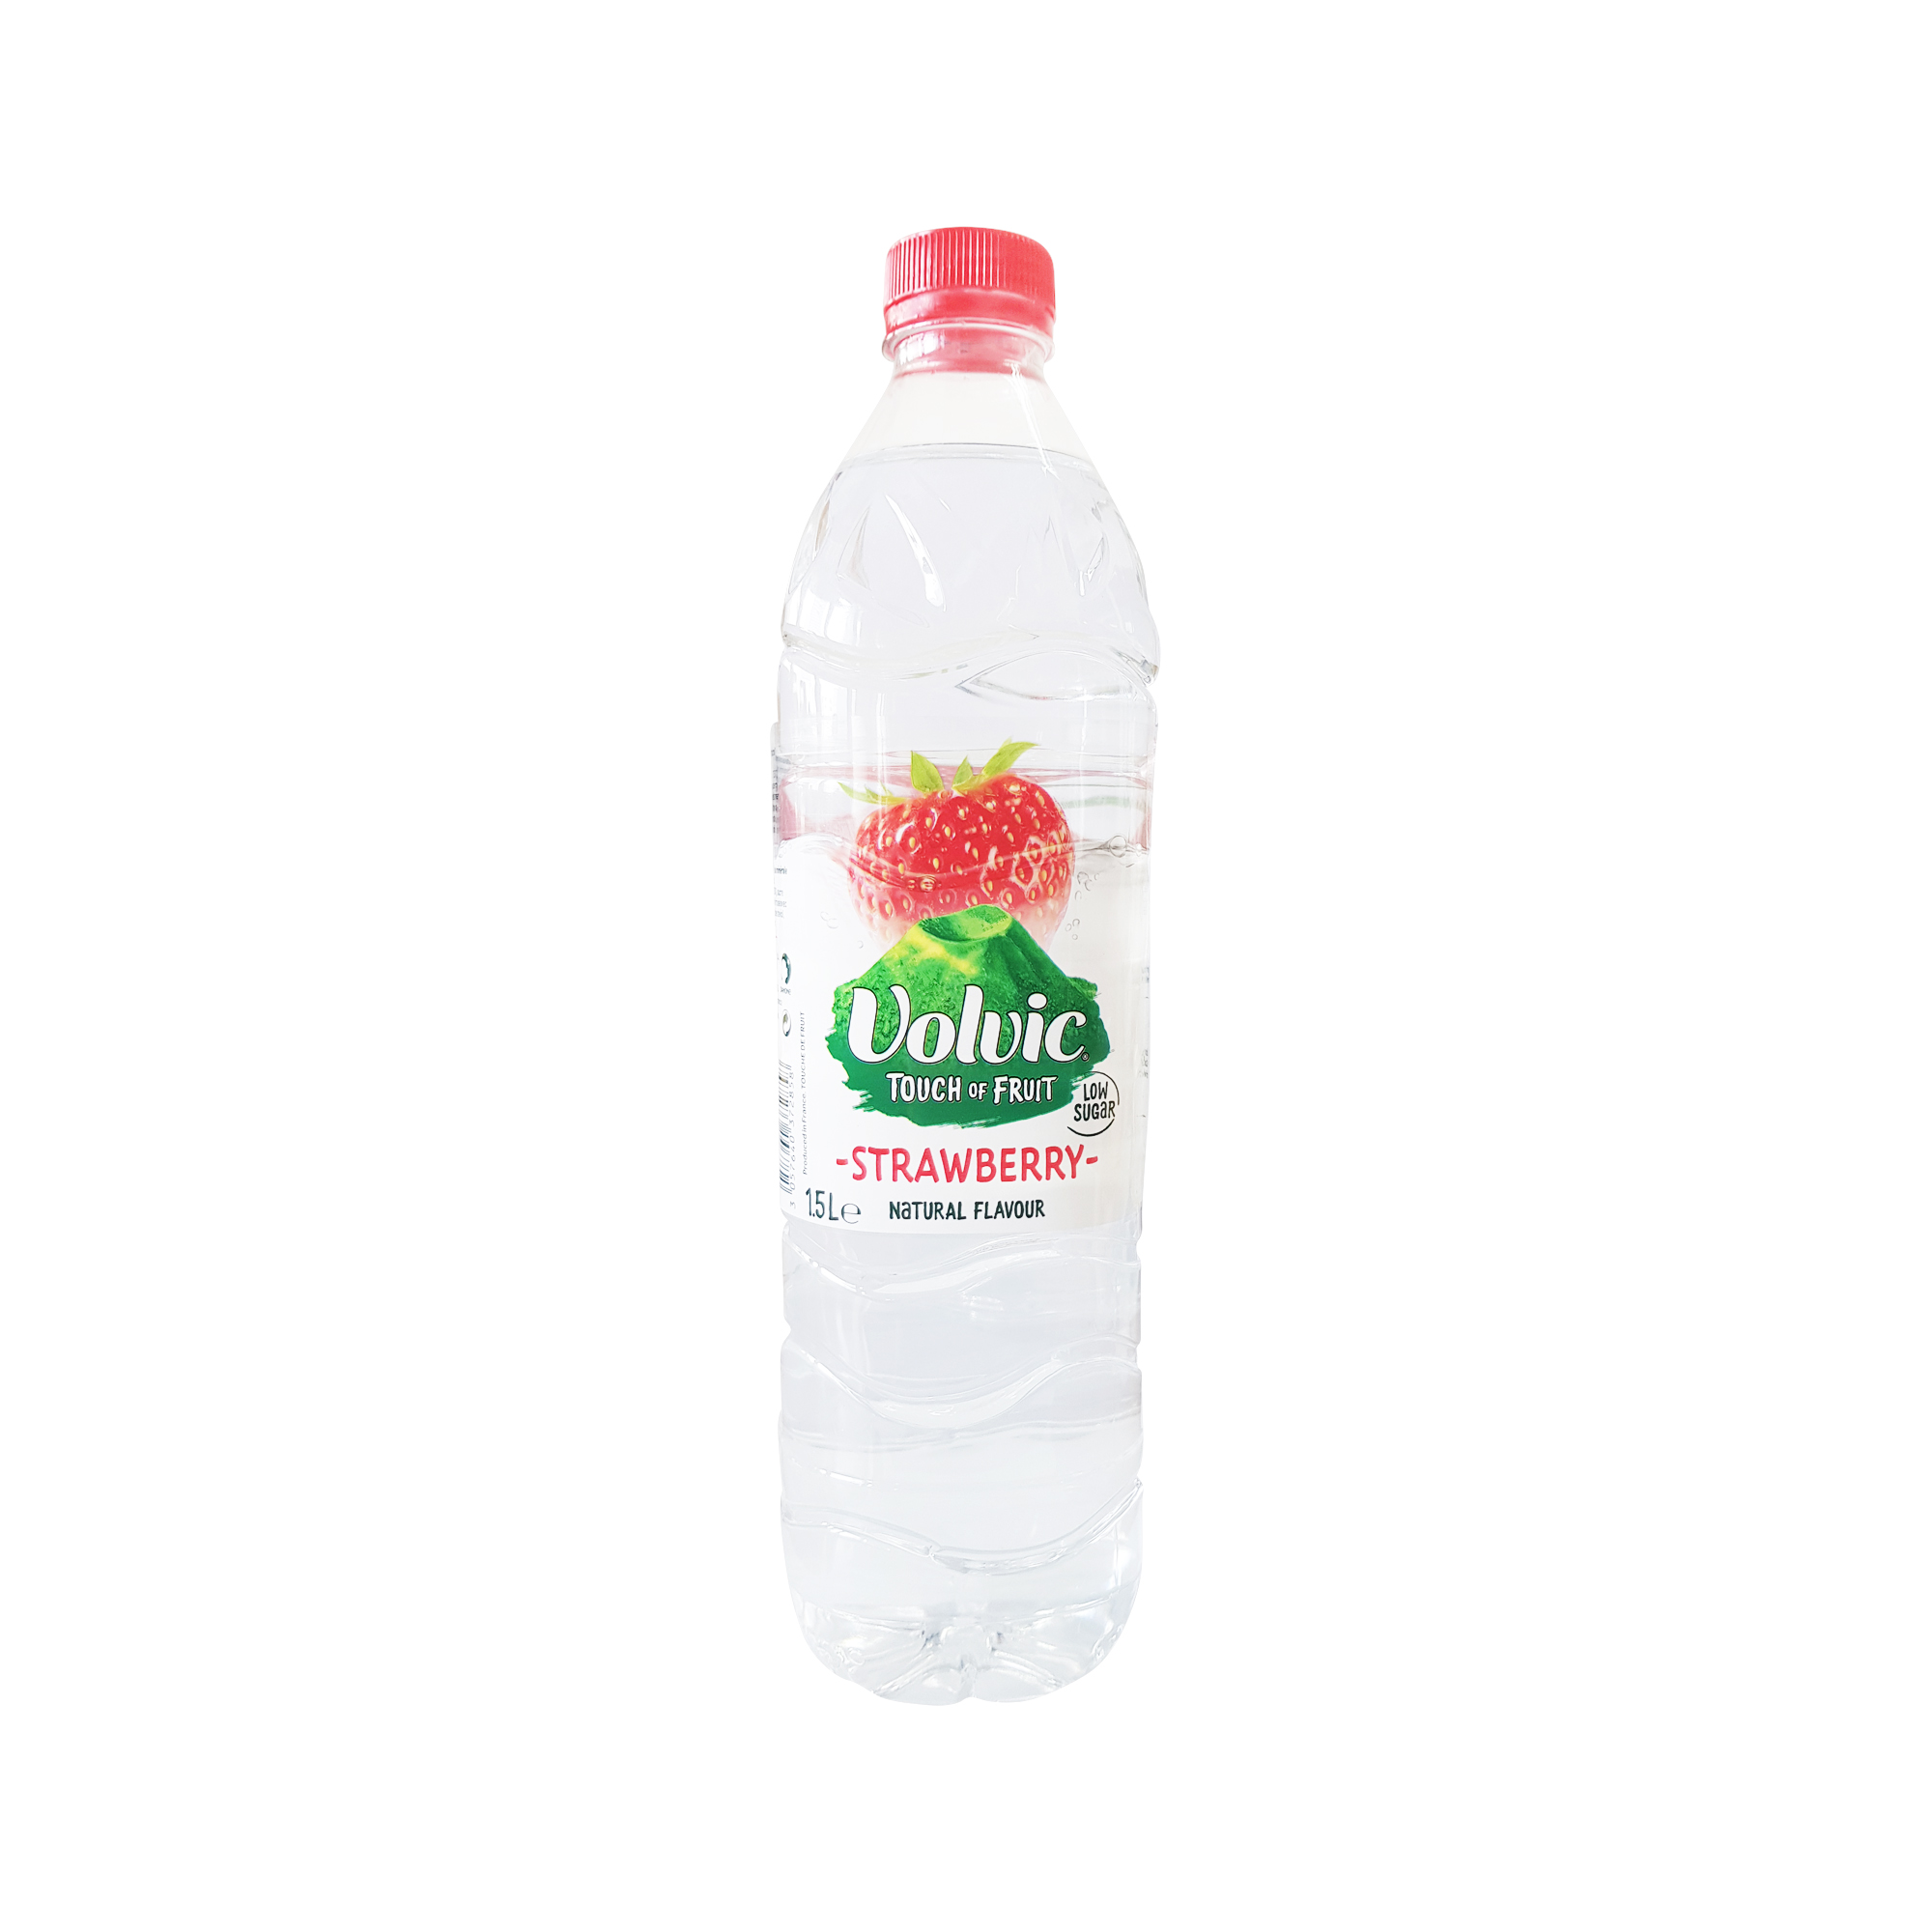 Volvic Touch Of Fruit Strawberry (1.5L)